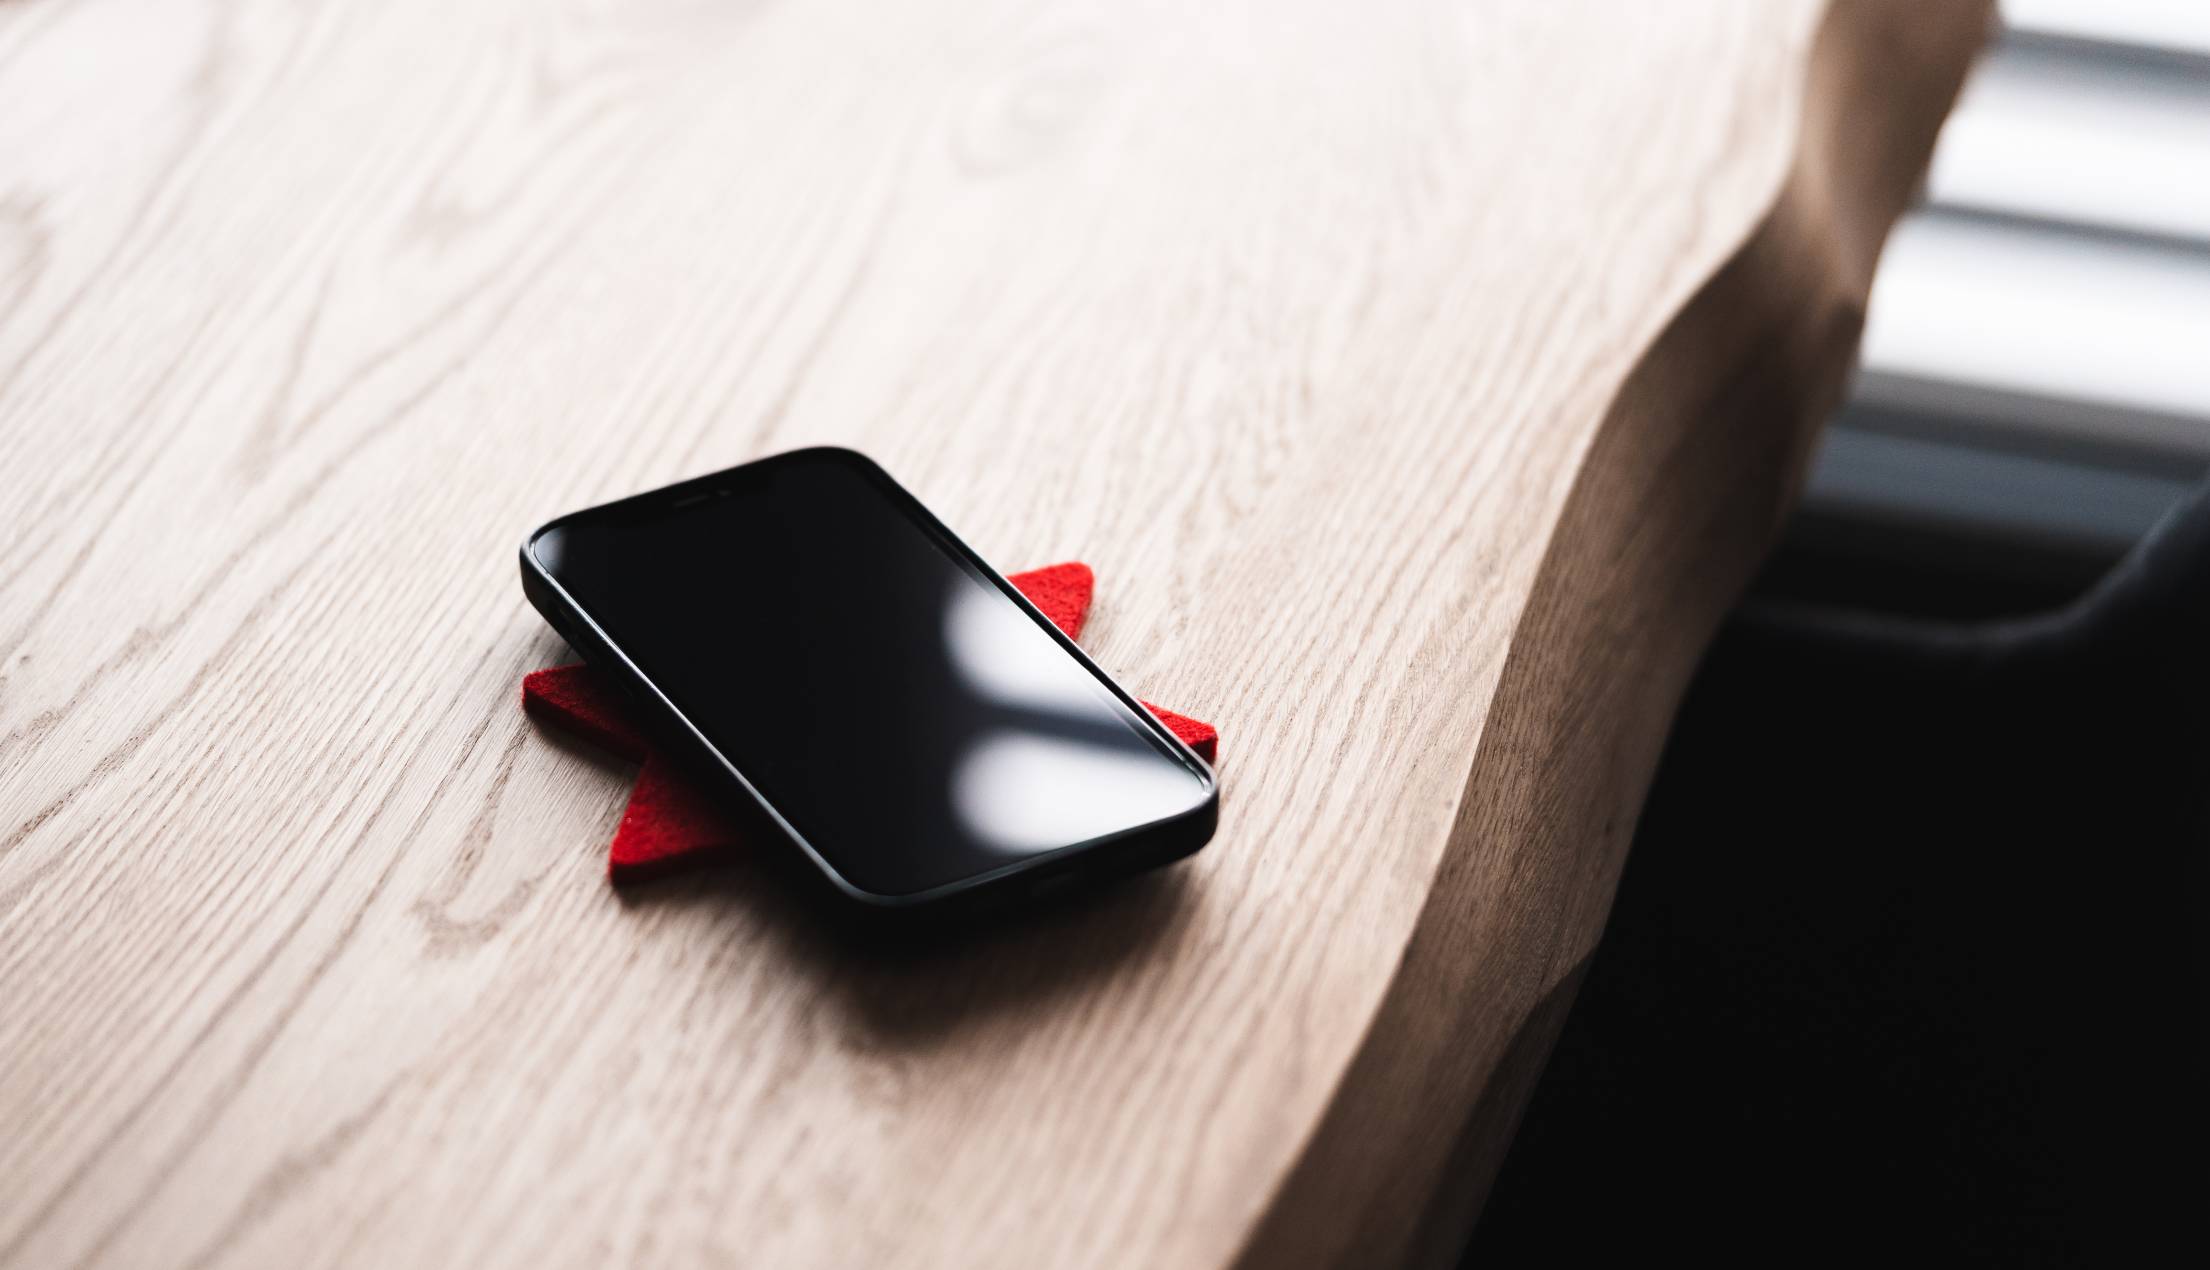 black-smartphone-lying-on-a-wooden-table-free-photo.jpg